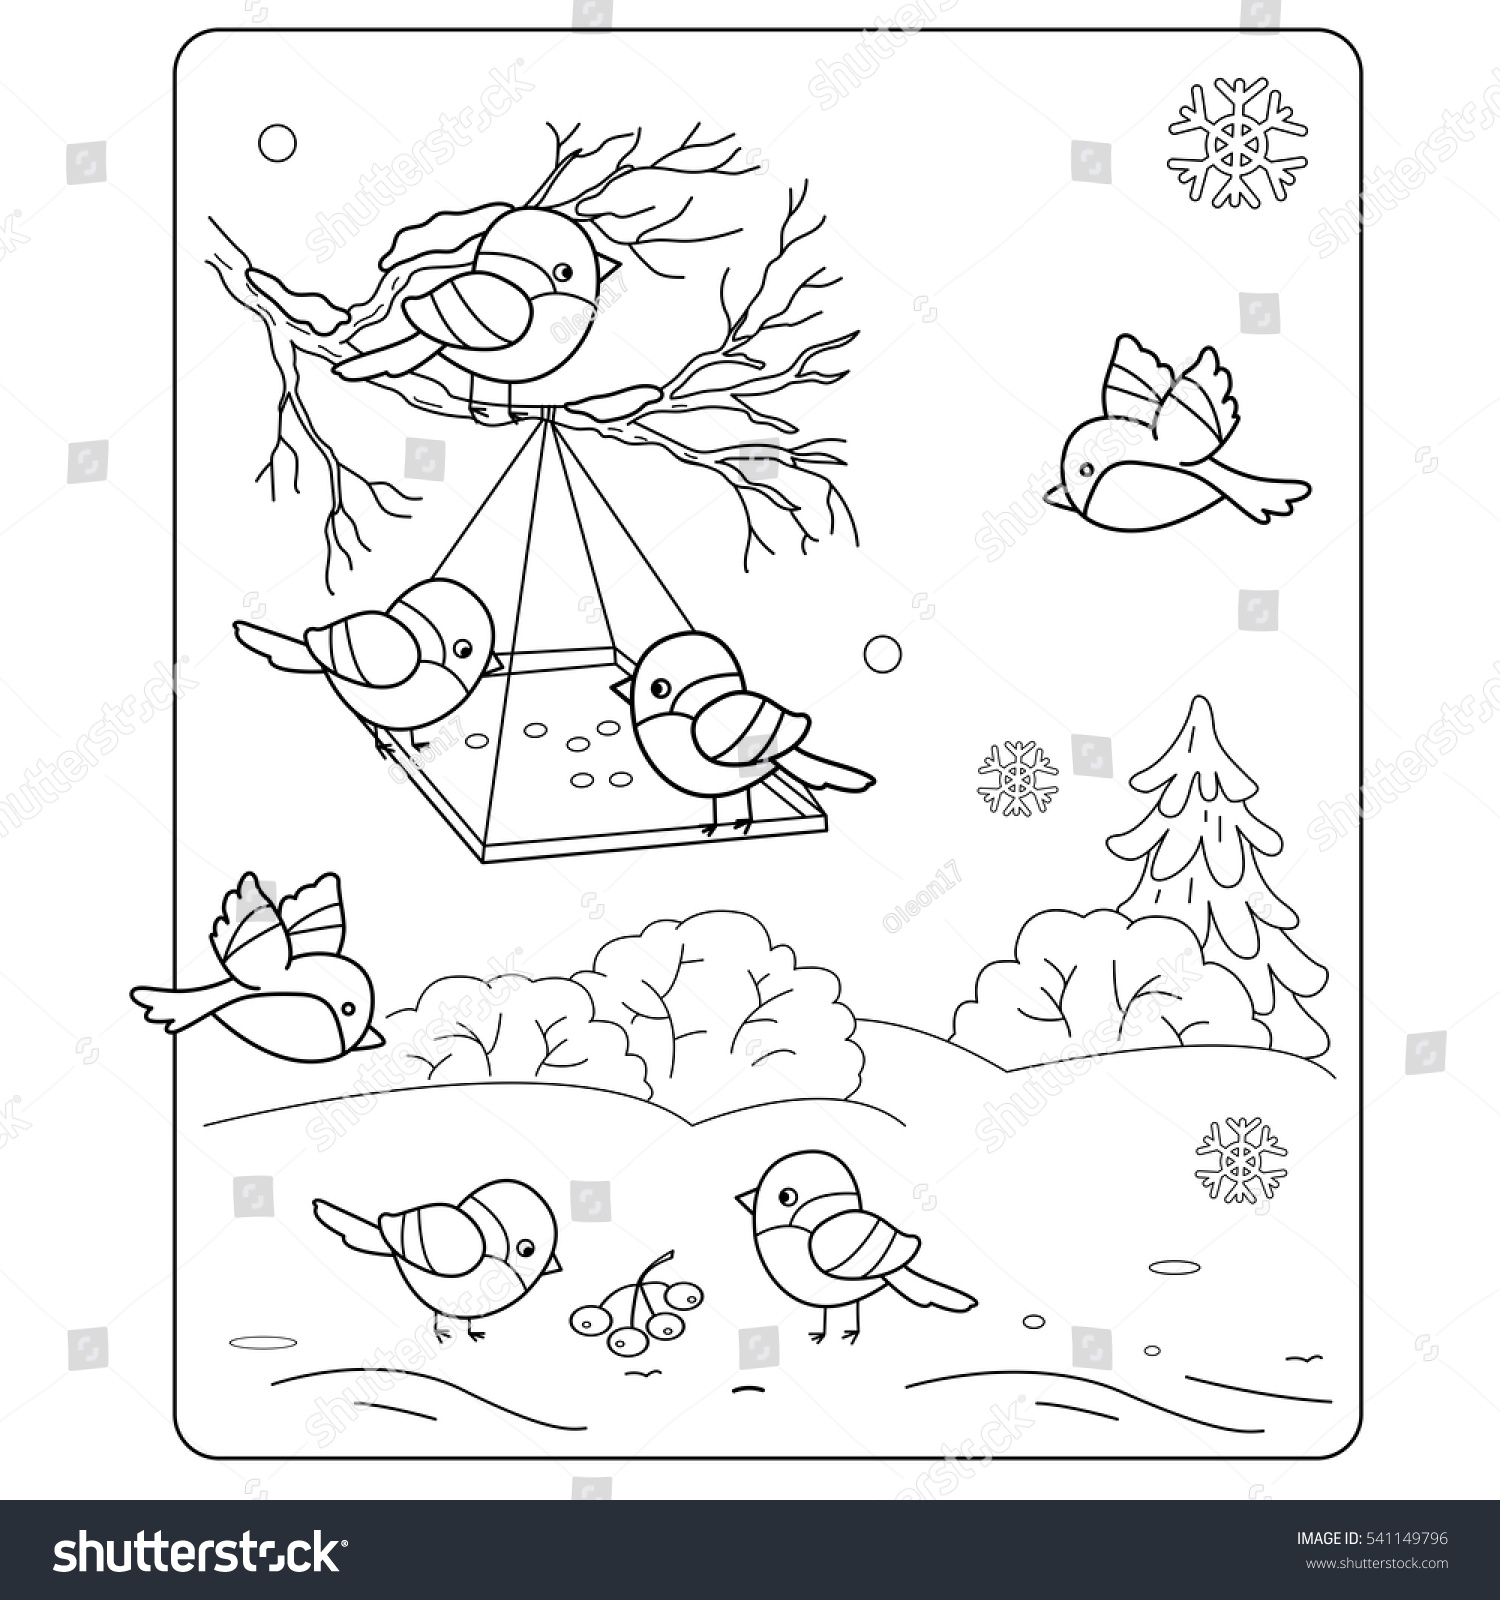 58 Top Winter Bird Coloring Pages Download Free Images